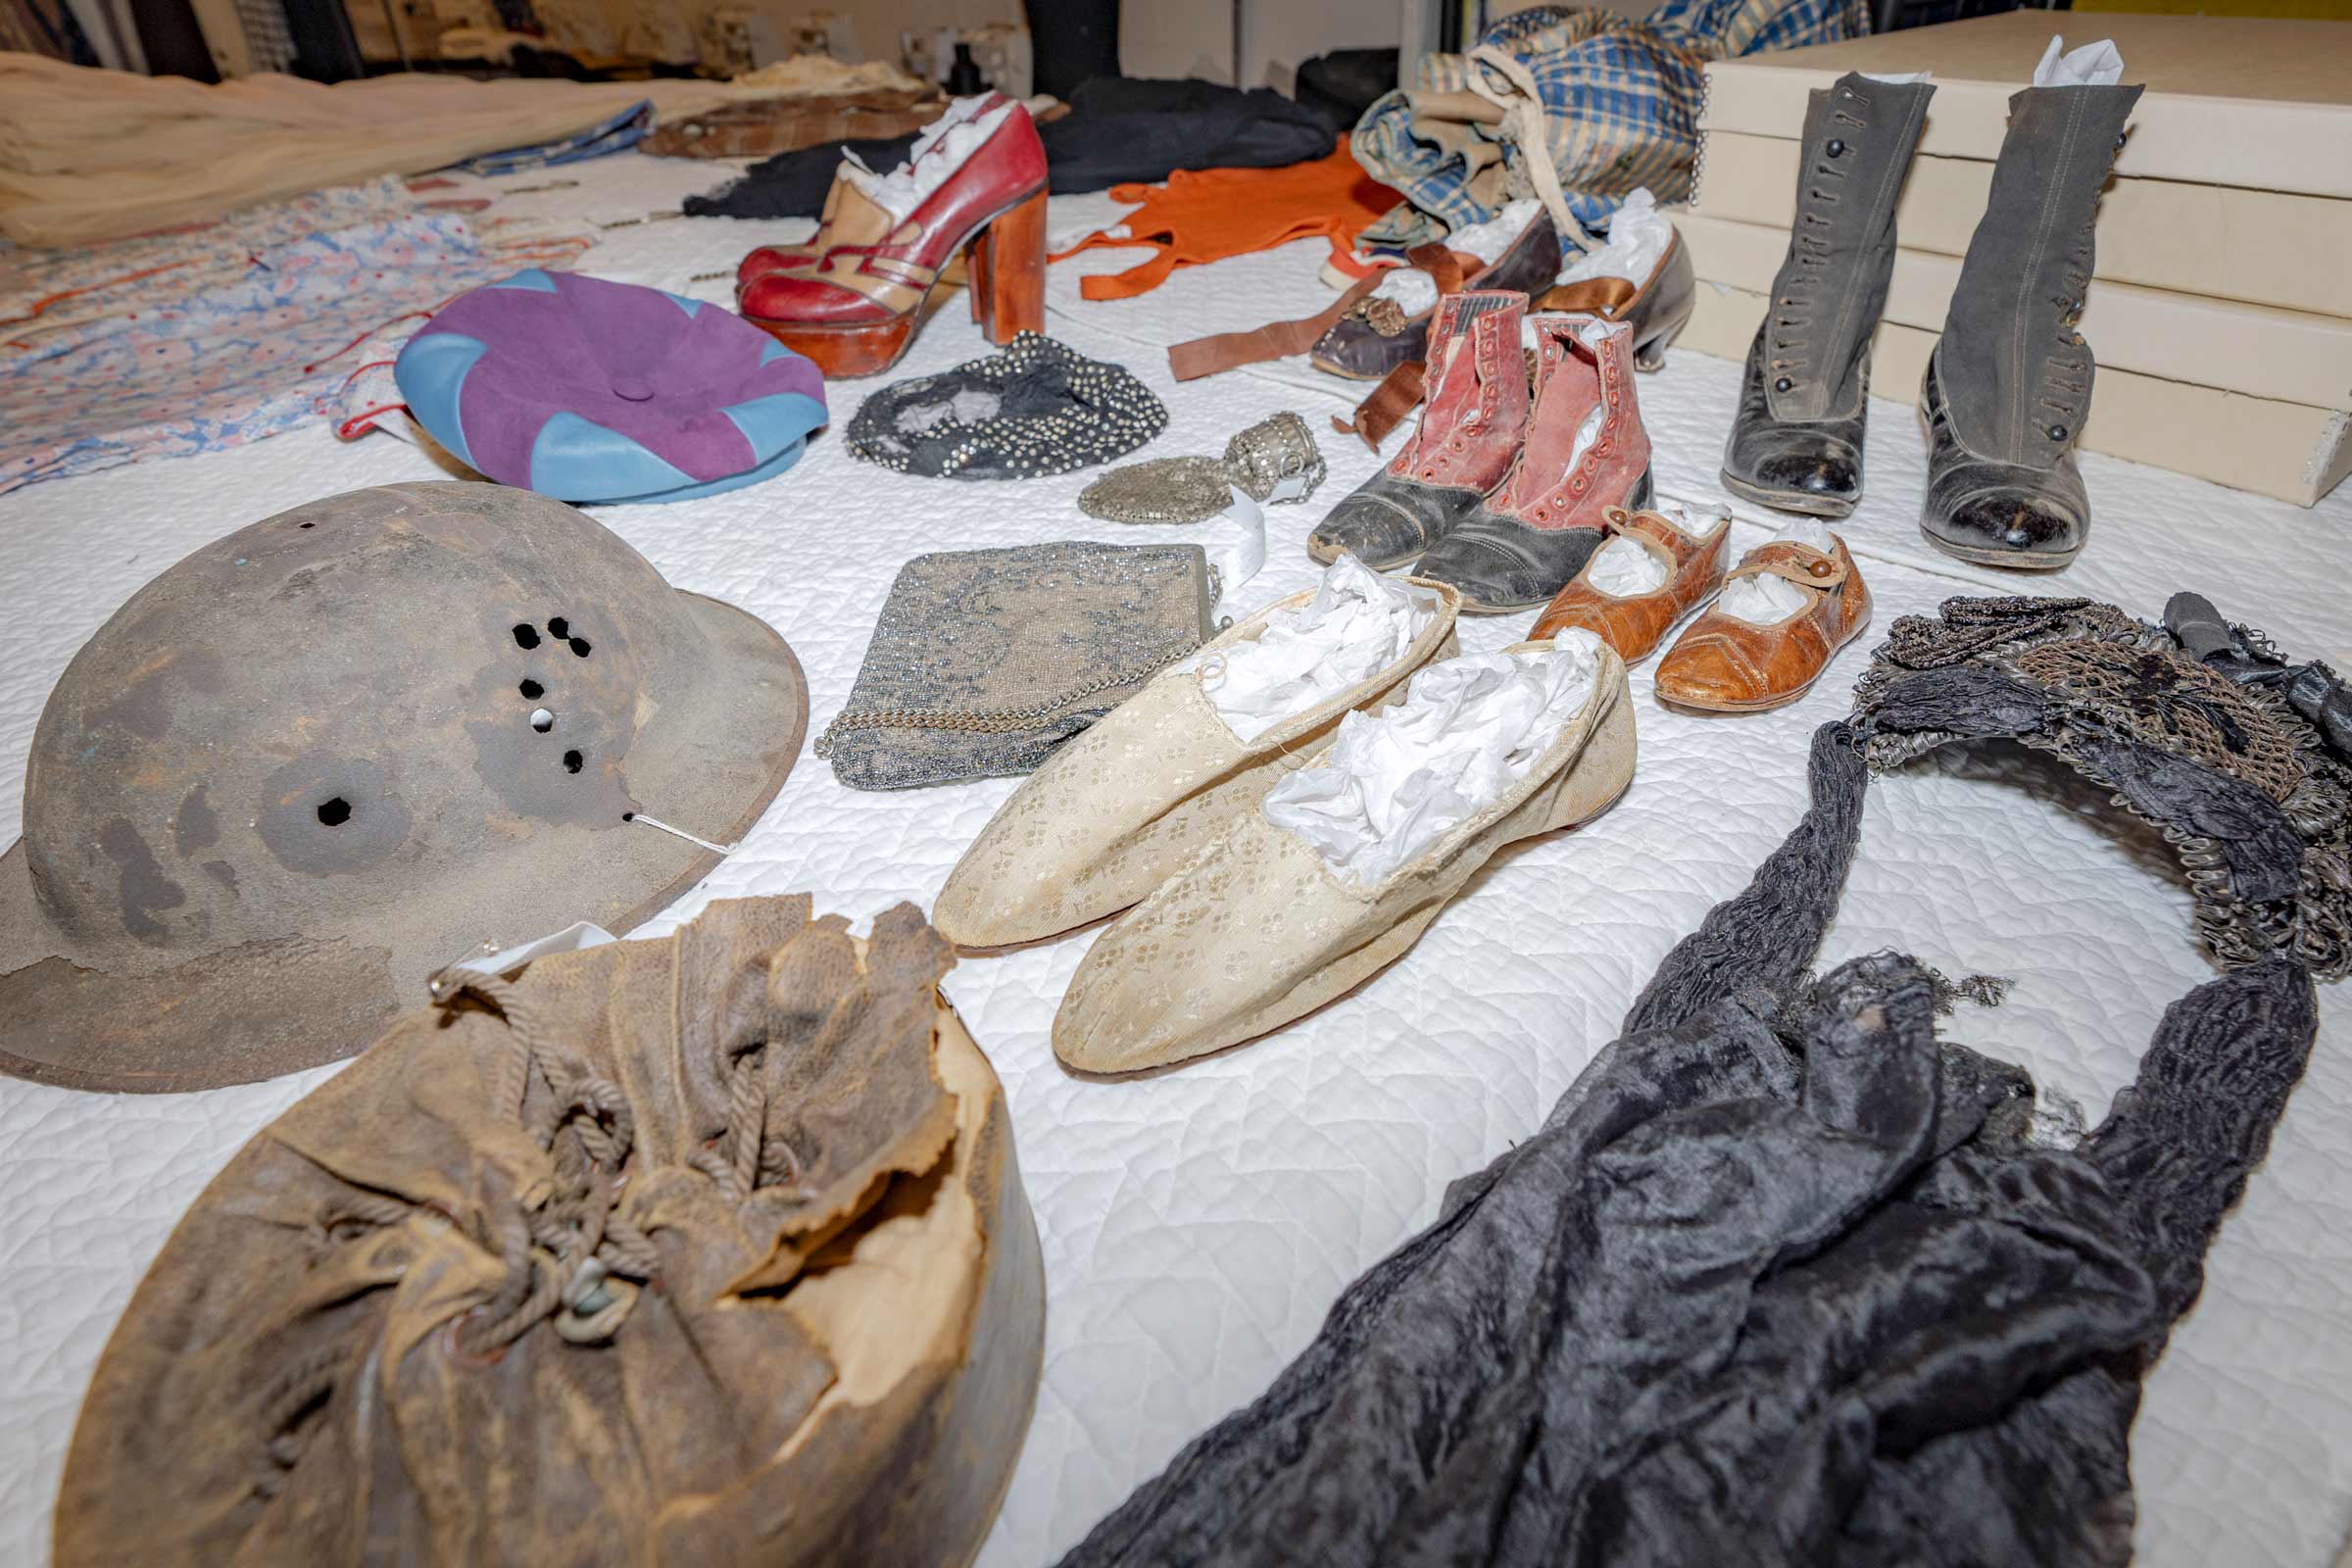 Various older articles of clothing on a table